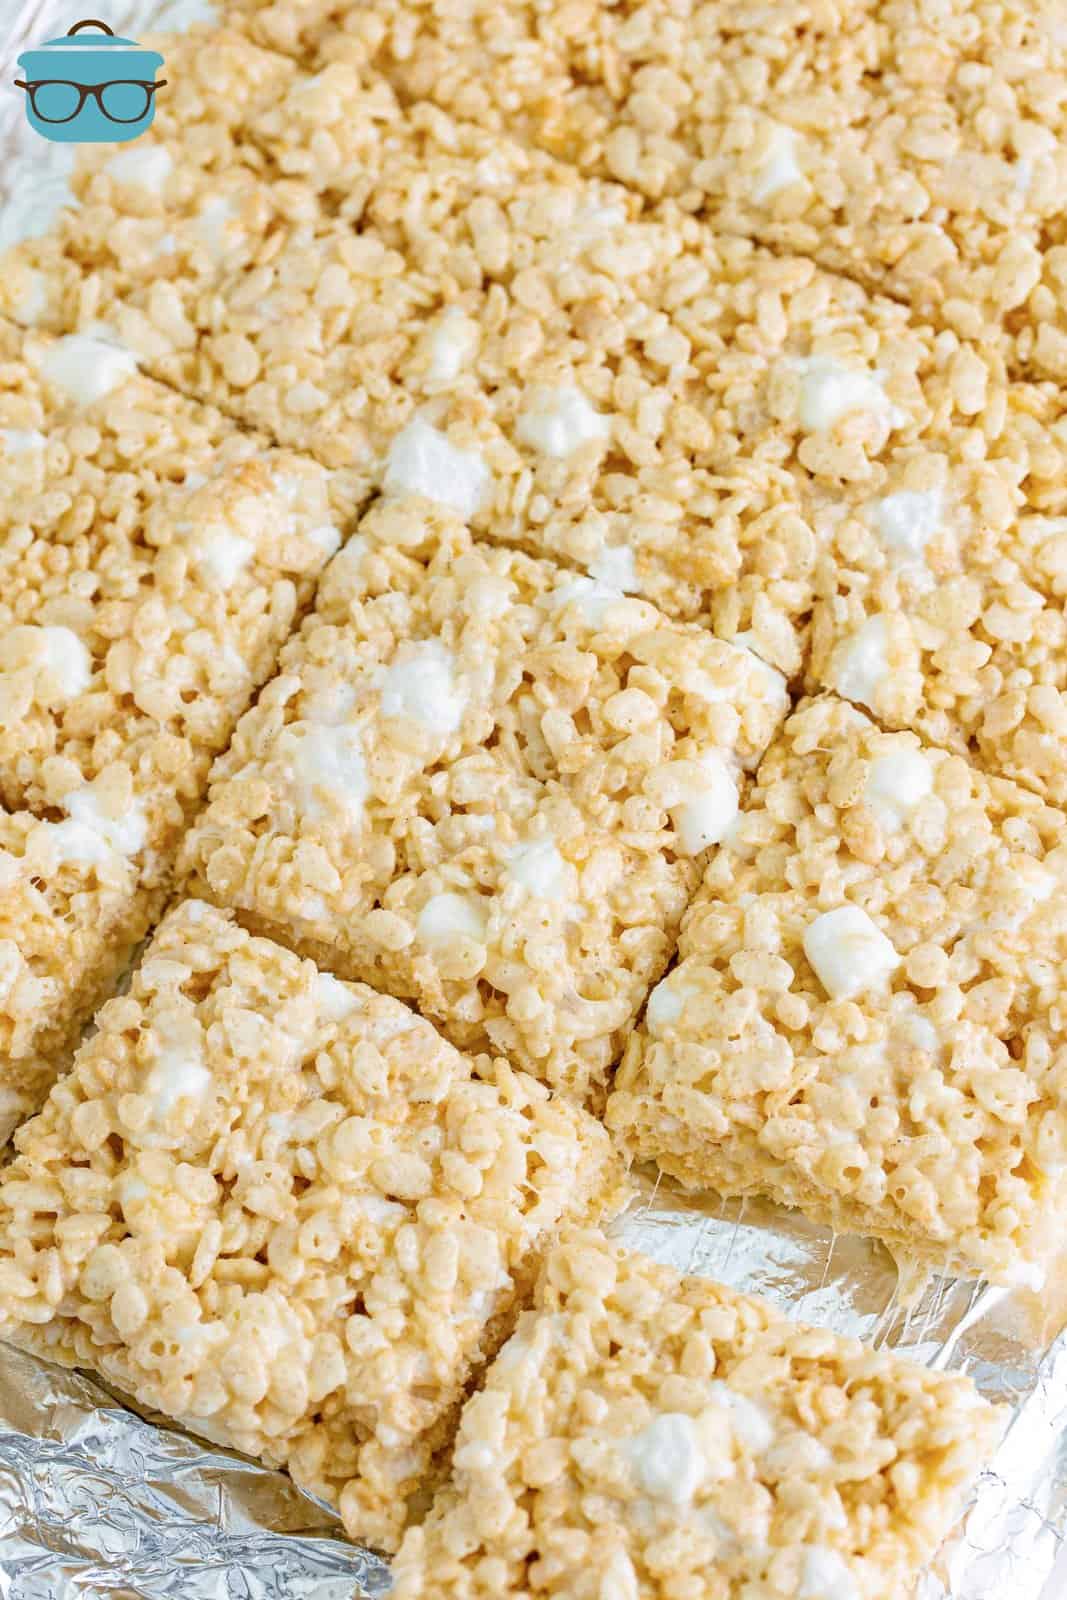 Some freshly made Rice Krispie Treats just cut into squares.